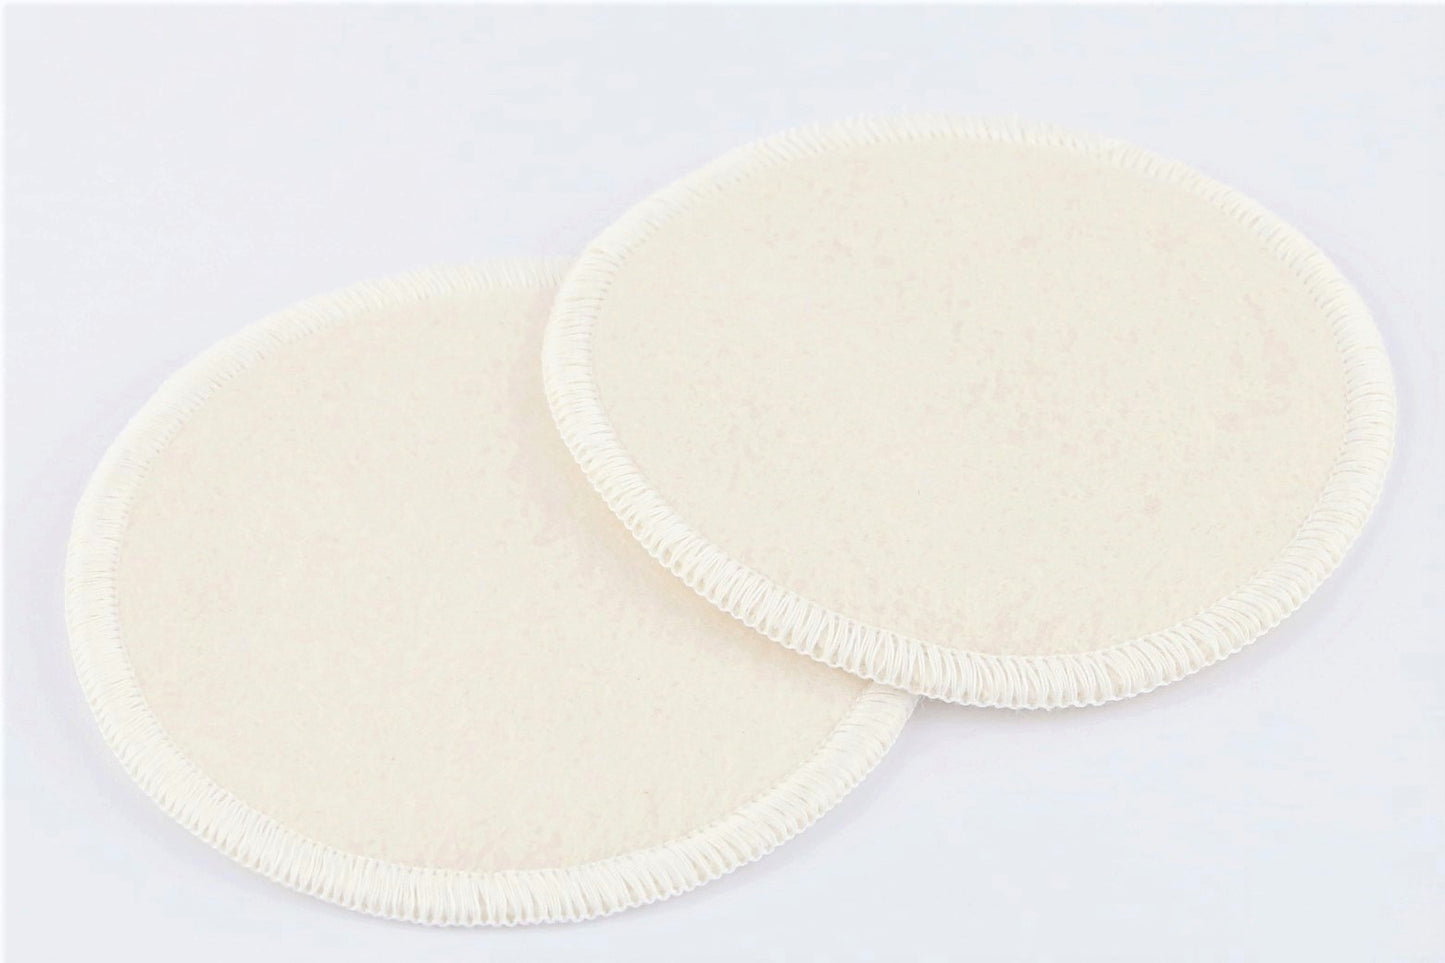 Reusable Makeup Remover Pads showing from very close detail